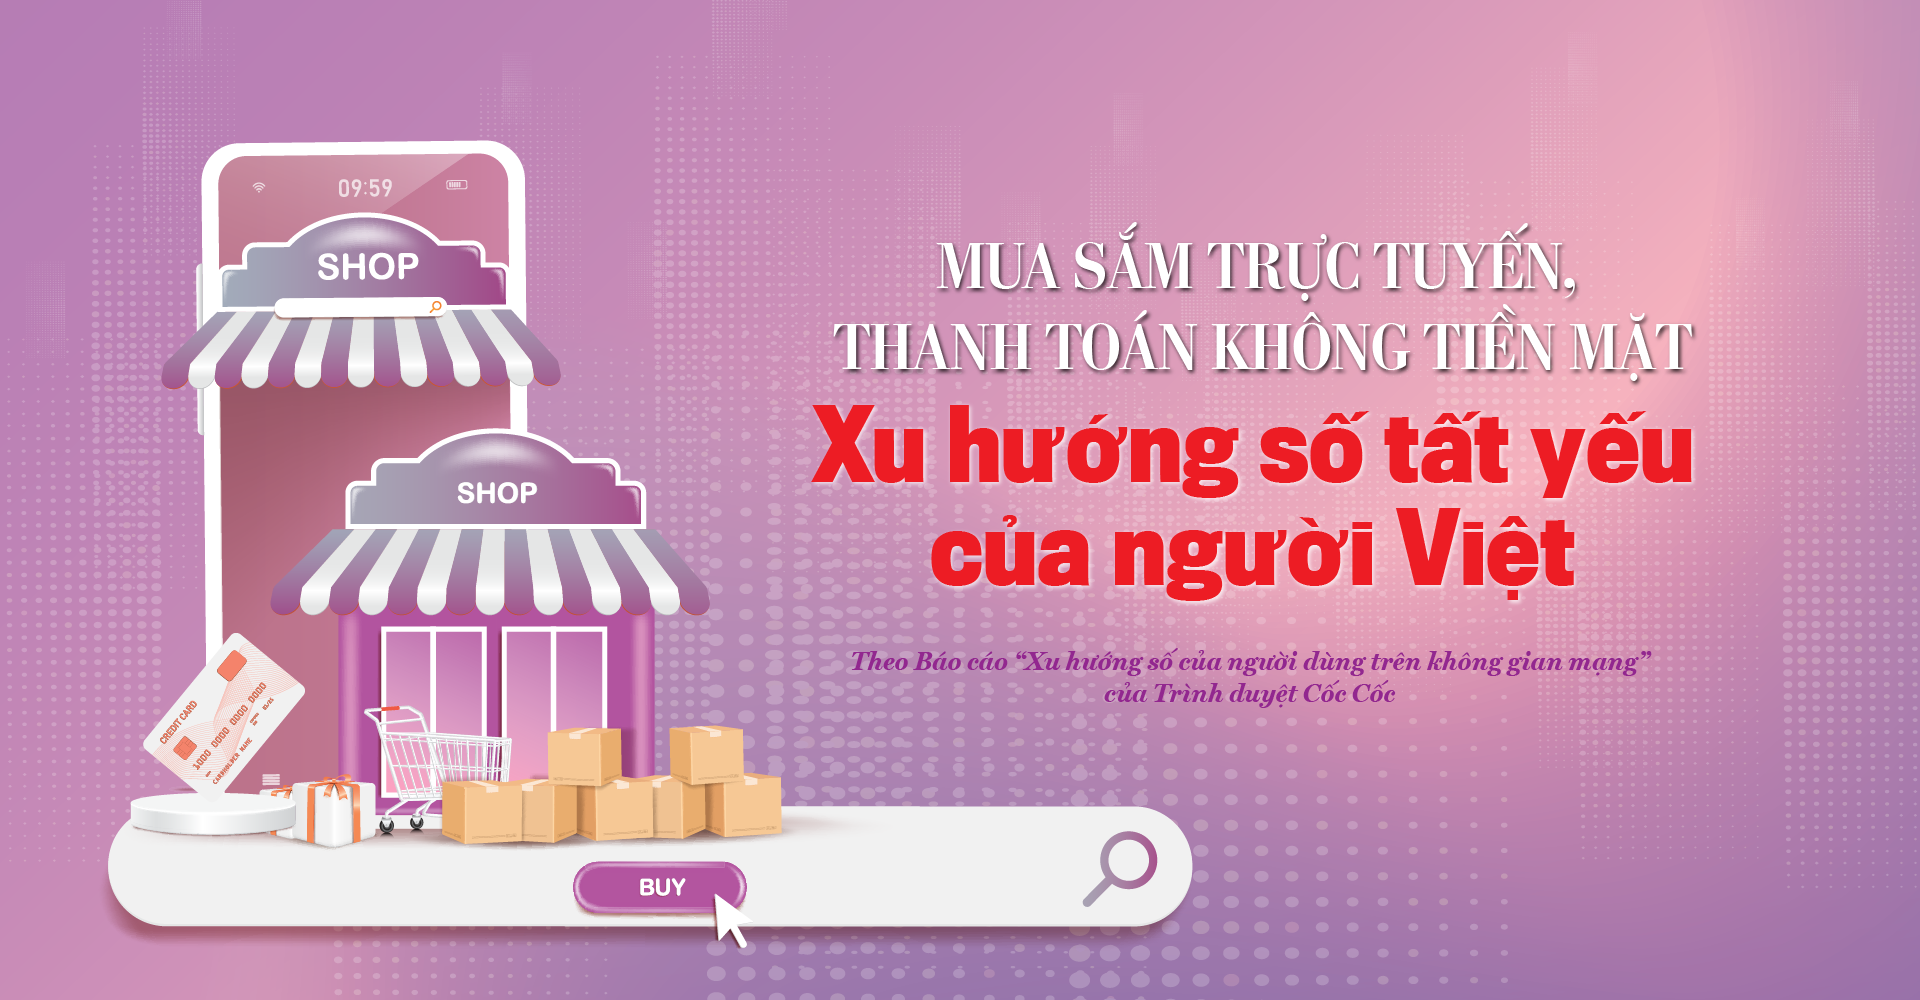 Online shopping, cashless payments: the inevitable digital trend of the Vietnamese - photo 1